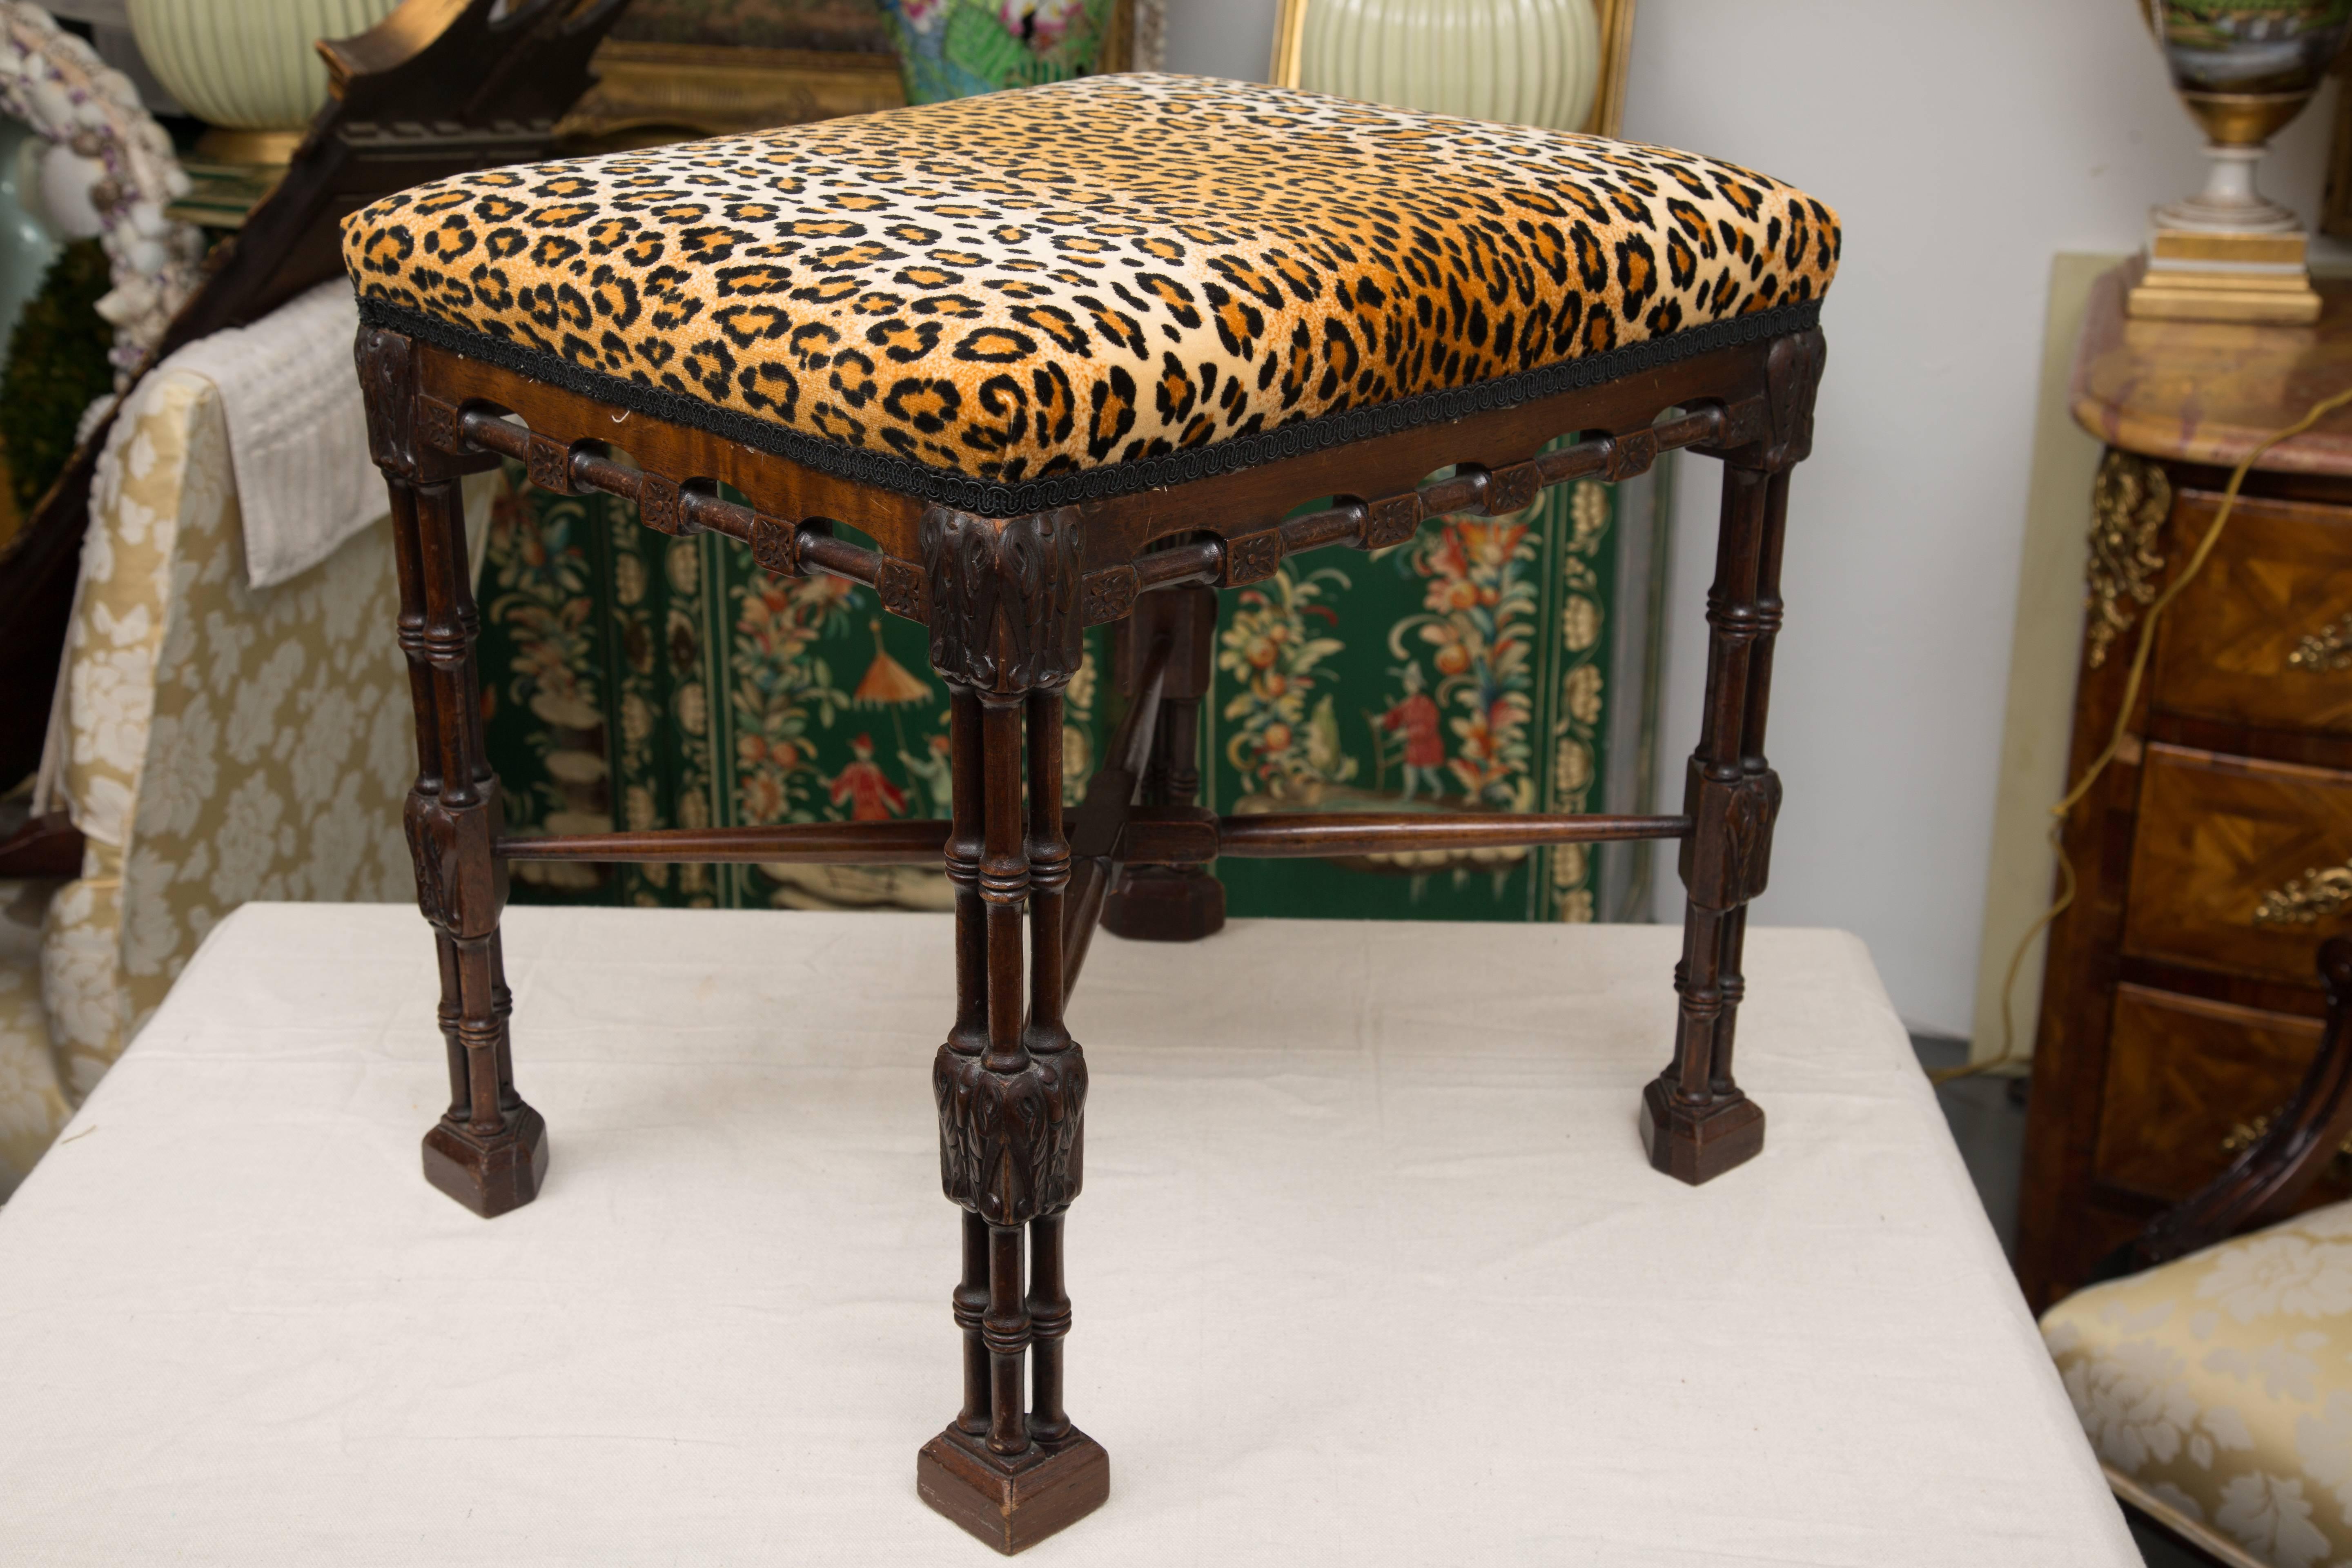 This is a striking near pair of Regency style faux bamboo benches with upholstered tops over faux bamboo friezes and supported by double faux bamboo legs ending in block feet, late 19th century.